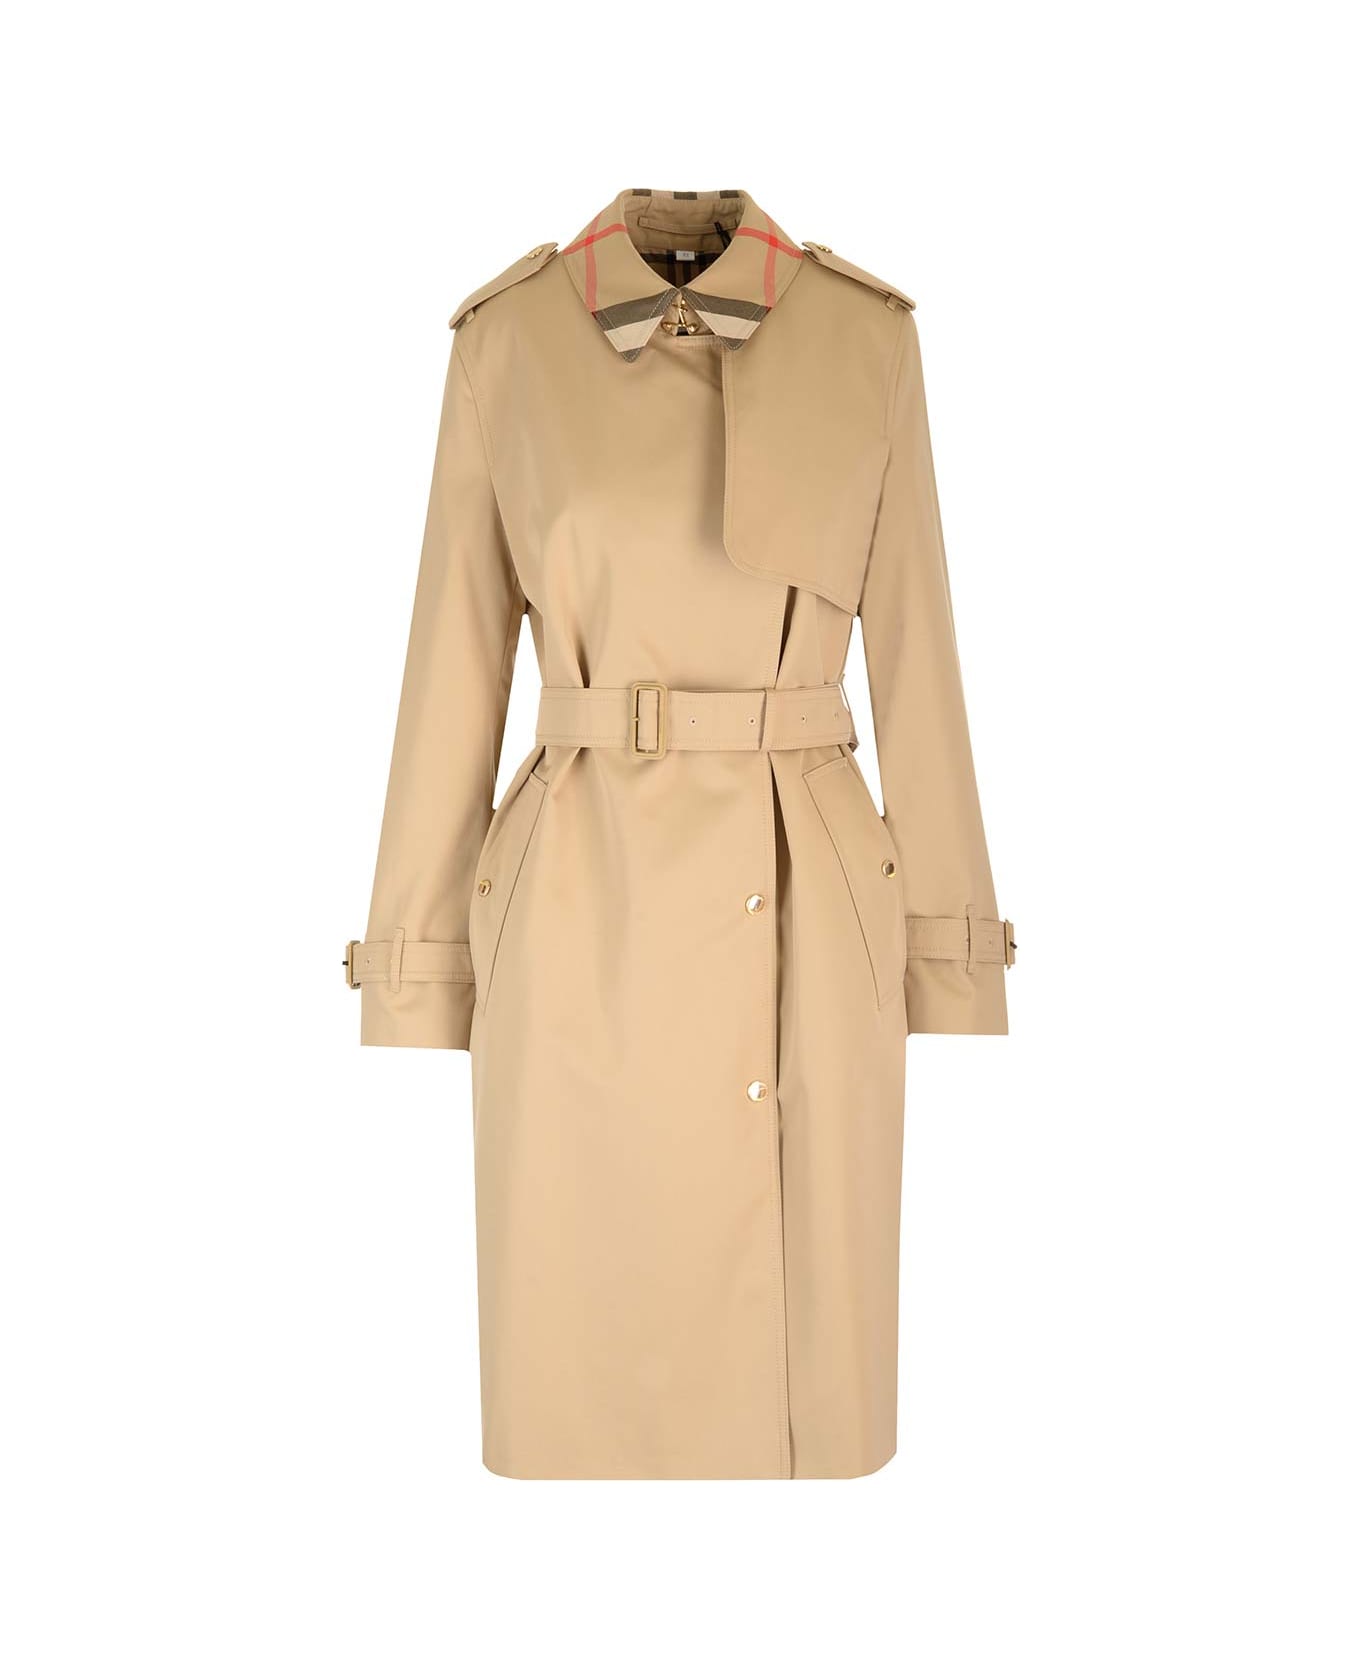 Burberry Honey Trench Coat With Check Collar - Beige